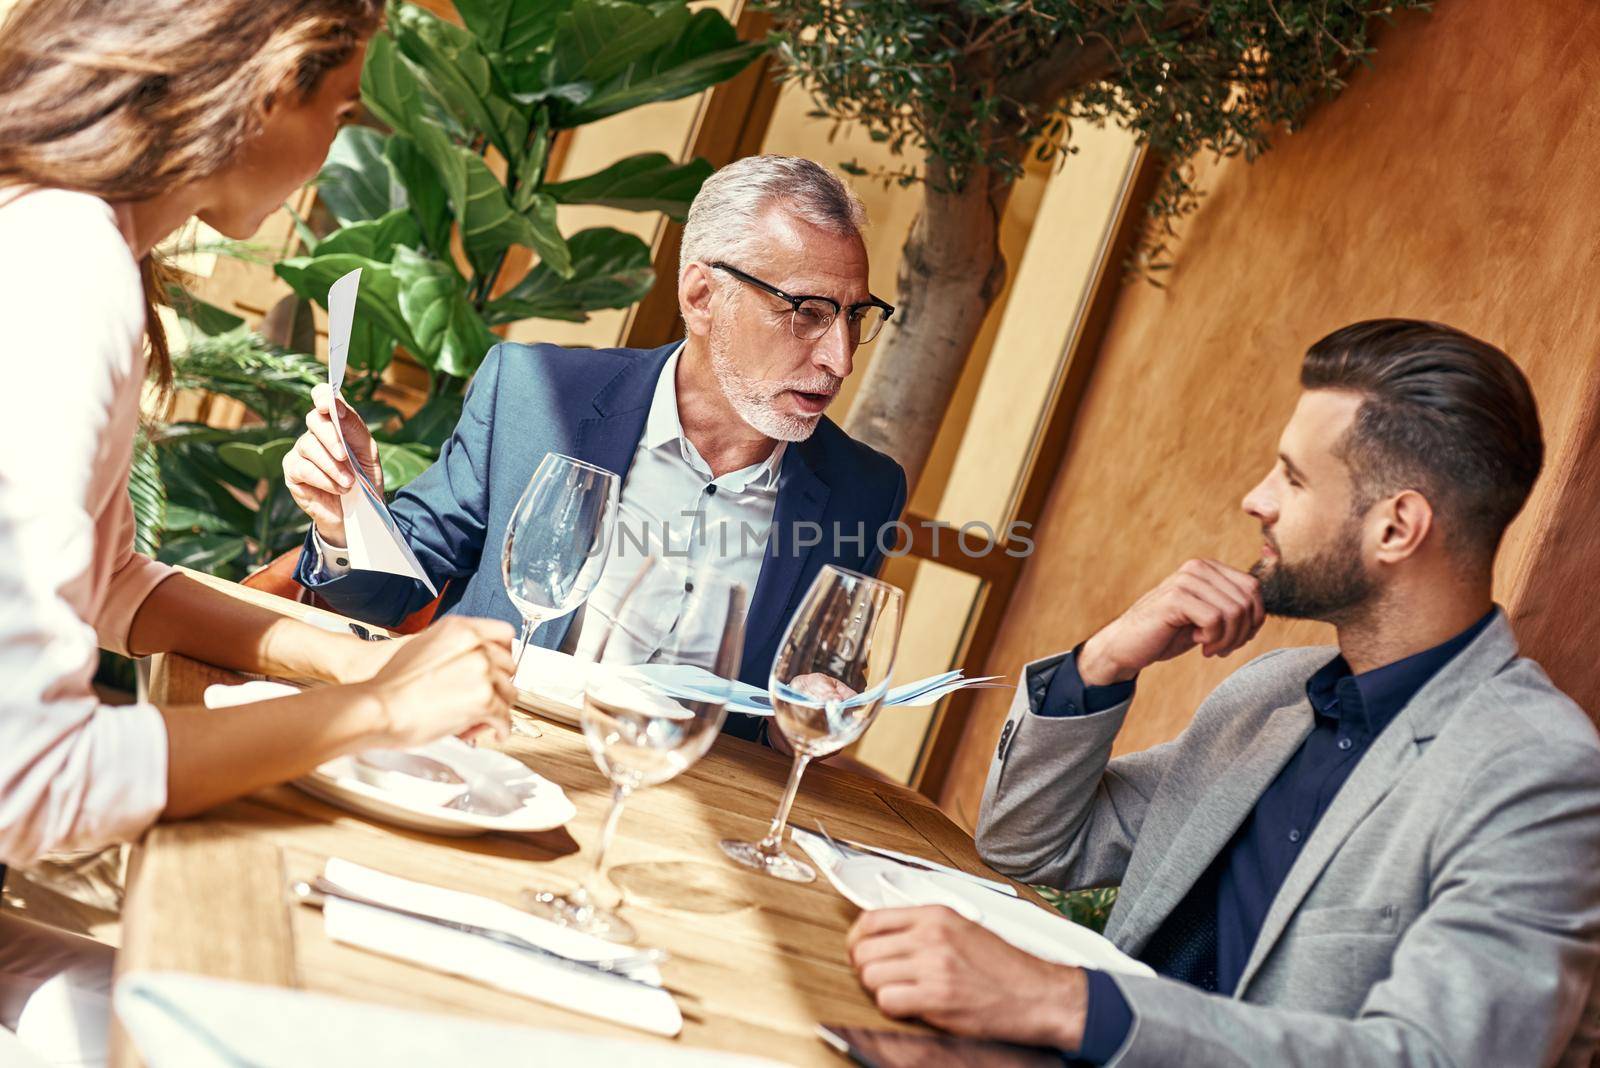 Business lunch. Three people in the restaurant sitting at table negotiating about contract. Team work concept by friendsstock